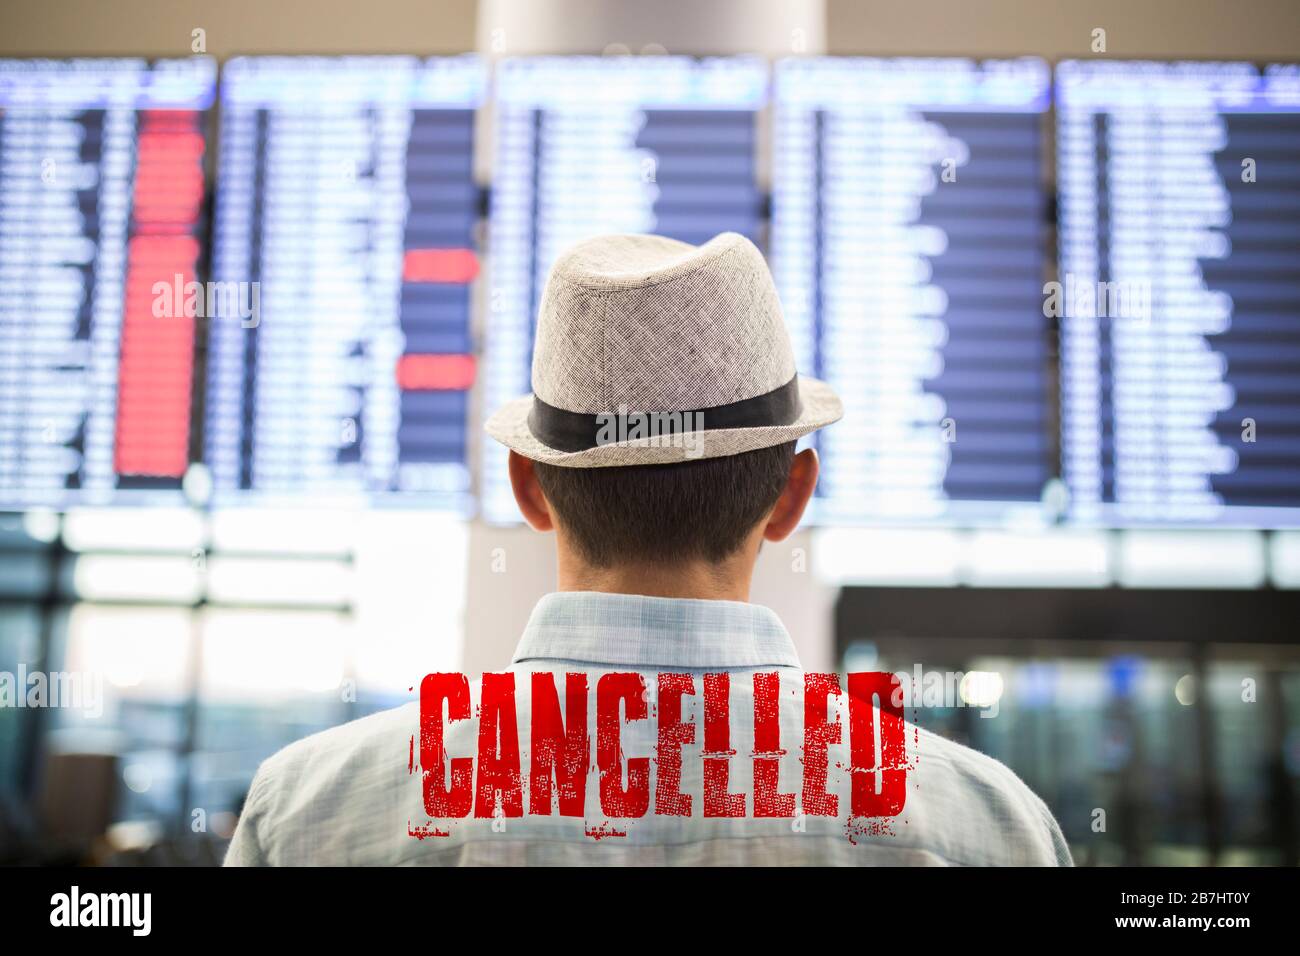 Cancelled flights due to coronavirus outbreak. Banned travels with airplanes. Stock Photo